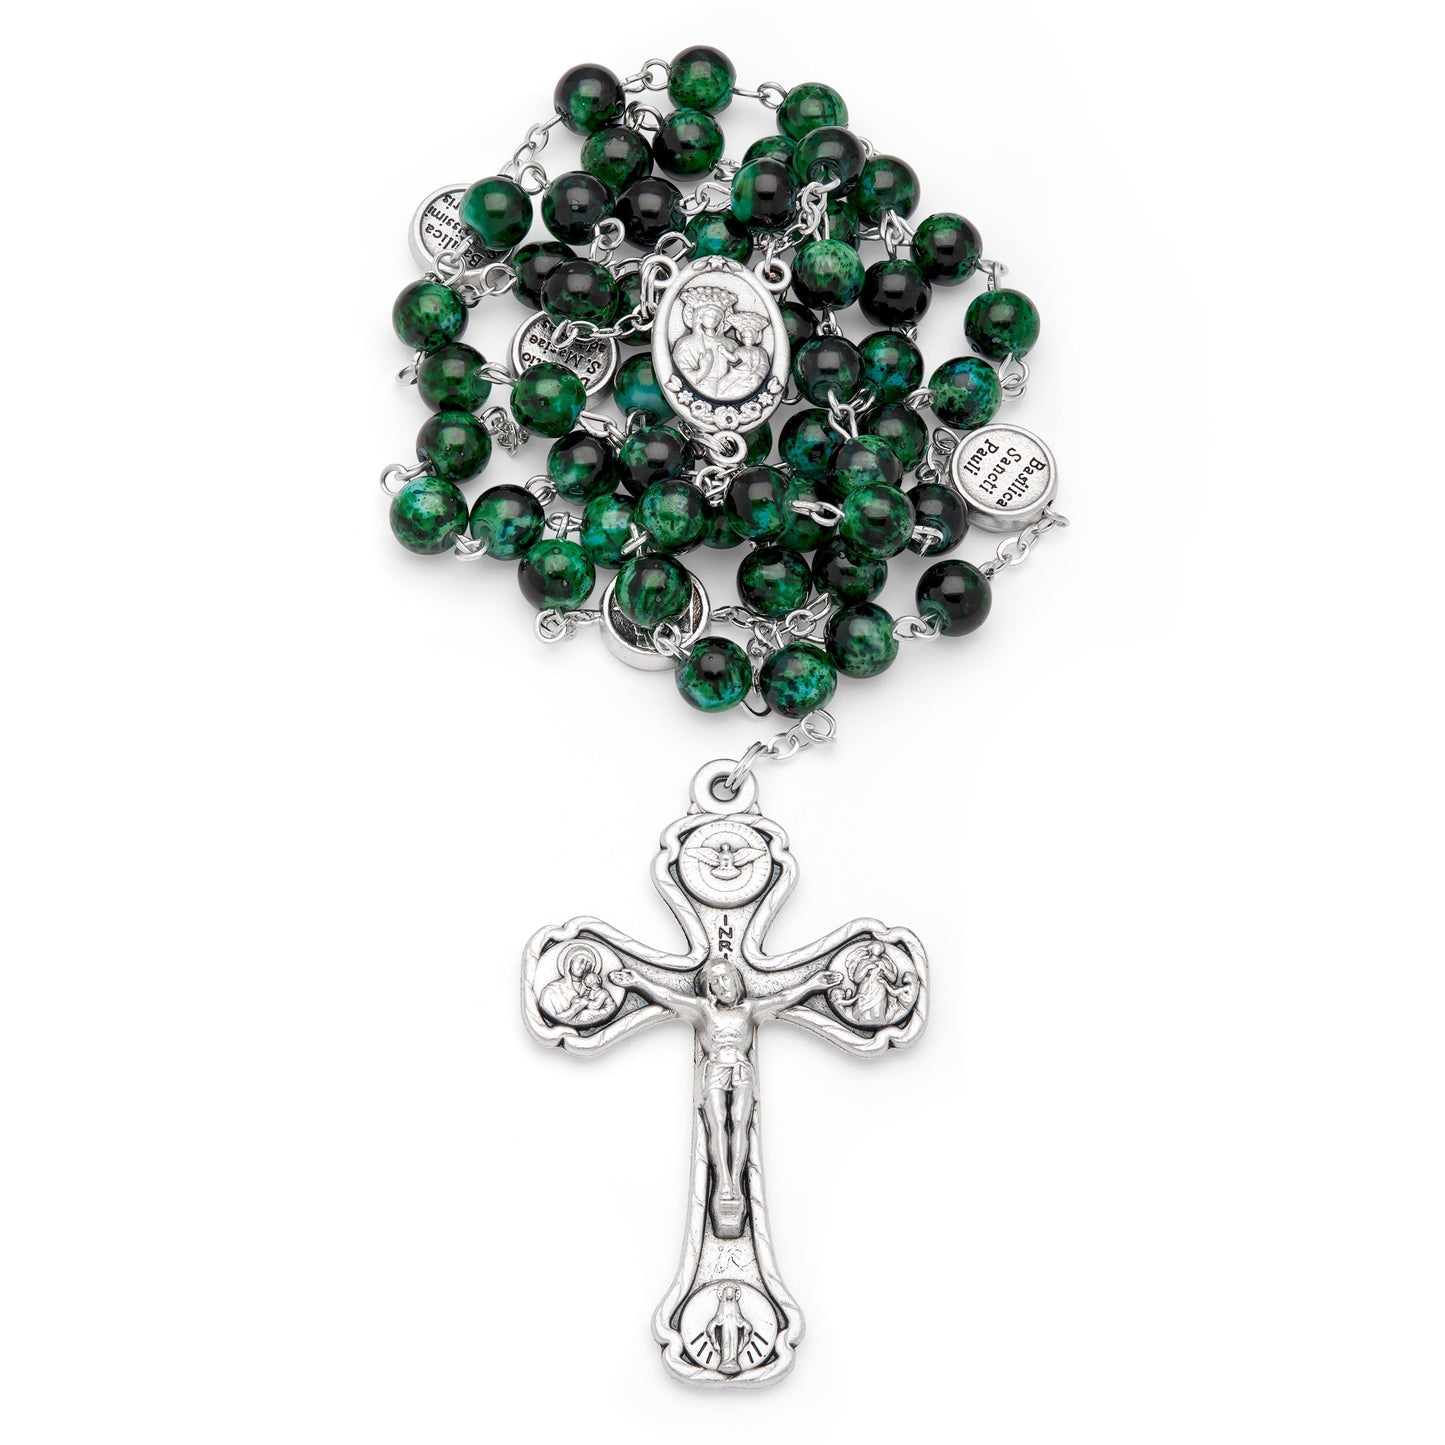 MONDO CATTOLICO Prayer Beads 48 cm (18.9 in) / 6 mm (0.24 in) Green Variegated Rosary